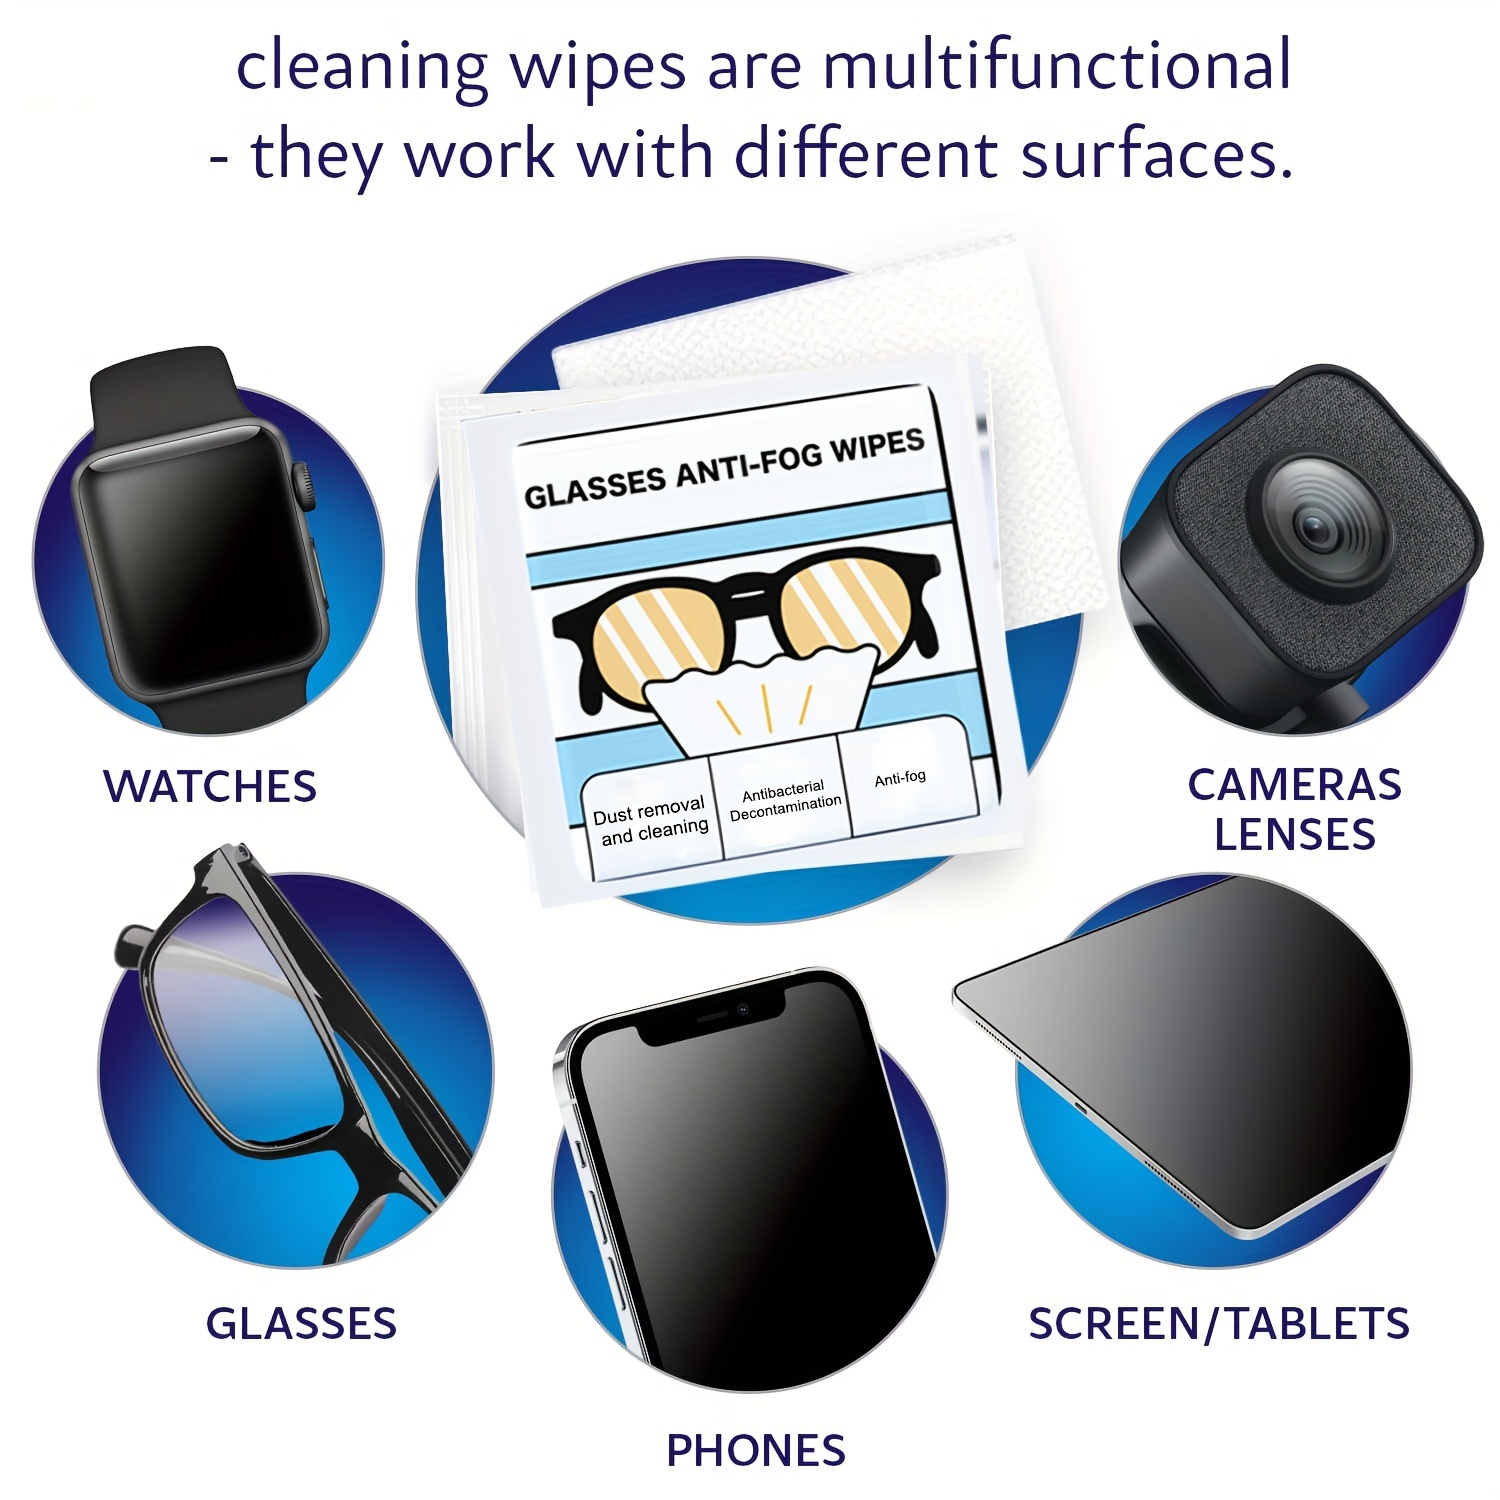 lens wipes for Glasses, Electronic, Mirrors, Cameras.